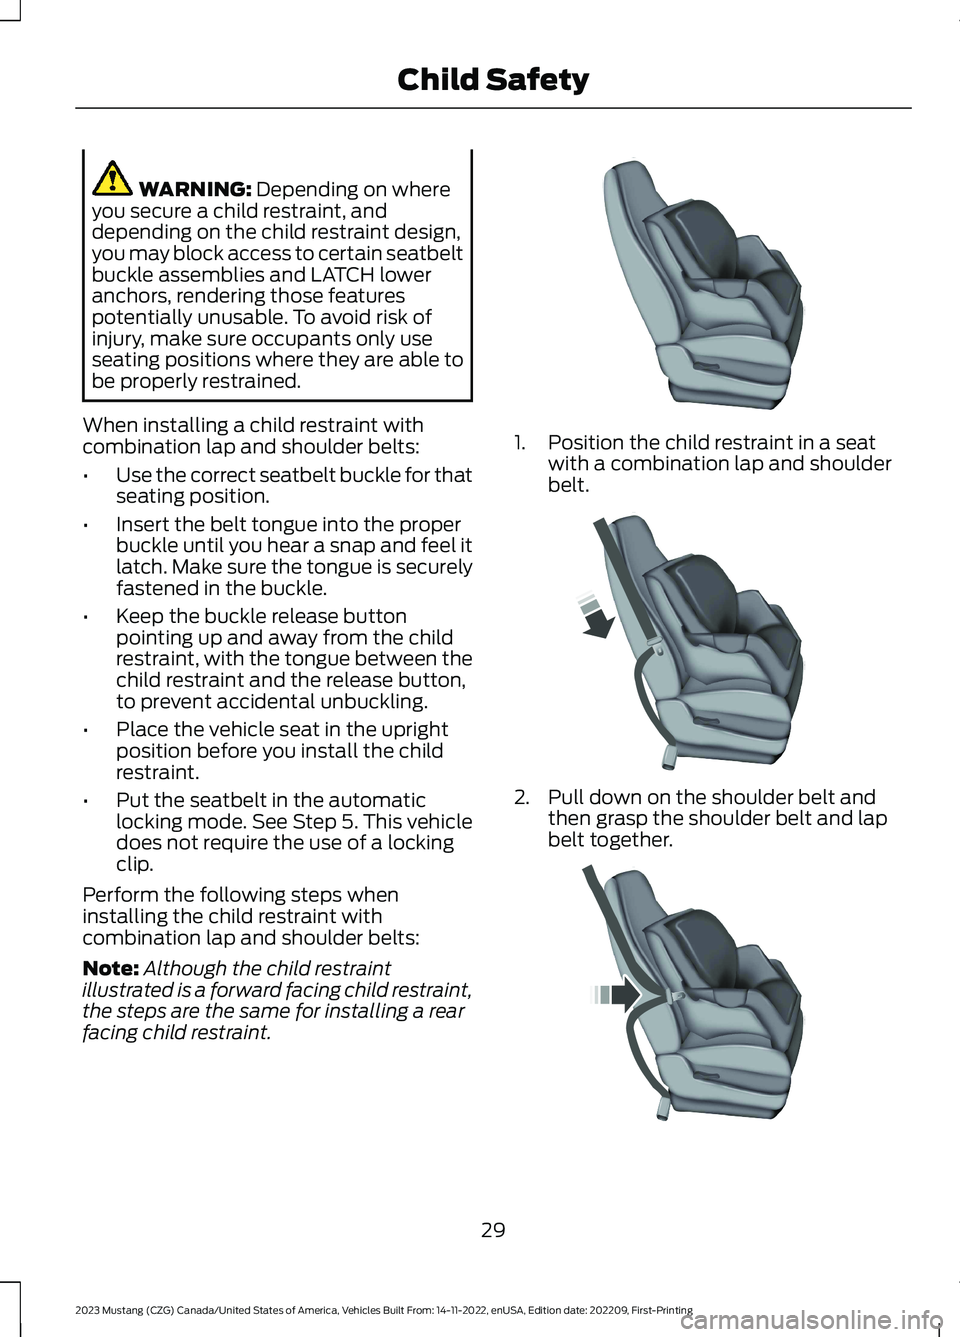 FORD MUSTANG 2023  Owners Manual WARNING: Depending on whereyou secure a child restraint, anddepending on the child restraint design,you may block access to certain seatbeltbuckle assemblies and LATCH loweranchors, rendering those fe